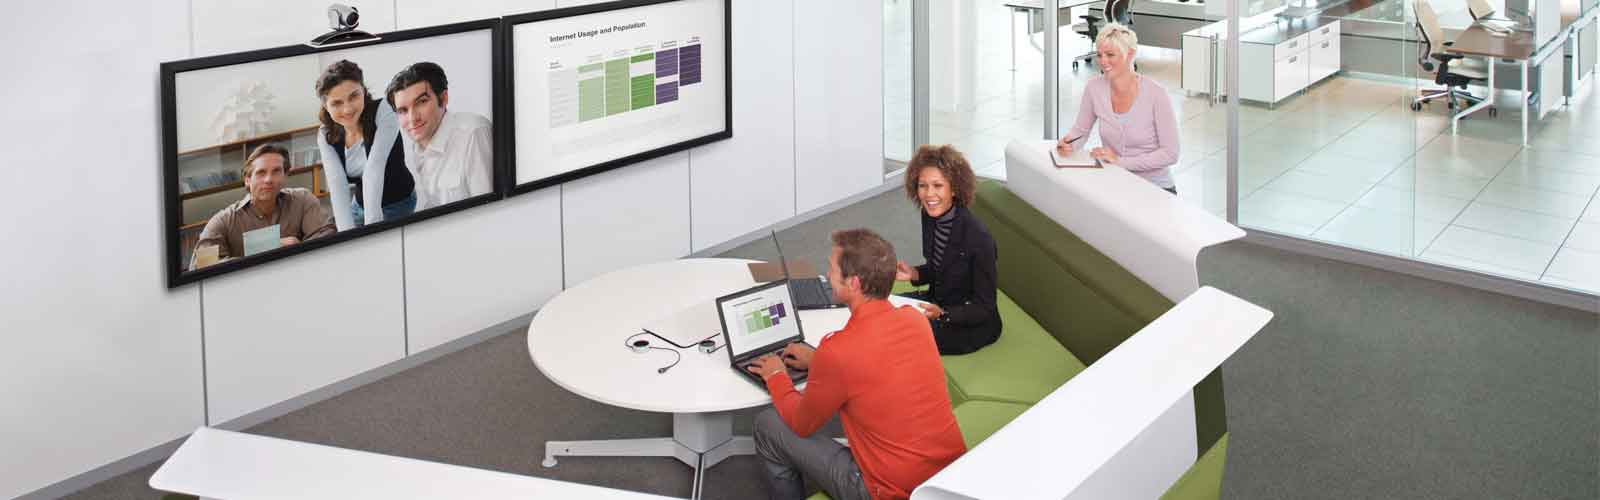 Colleagues using video conferencing technology, connecting with remote workers